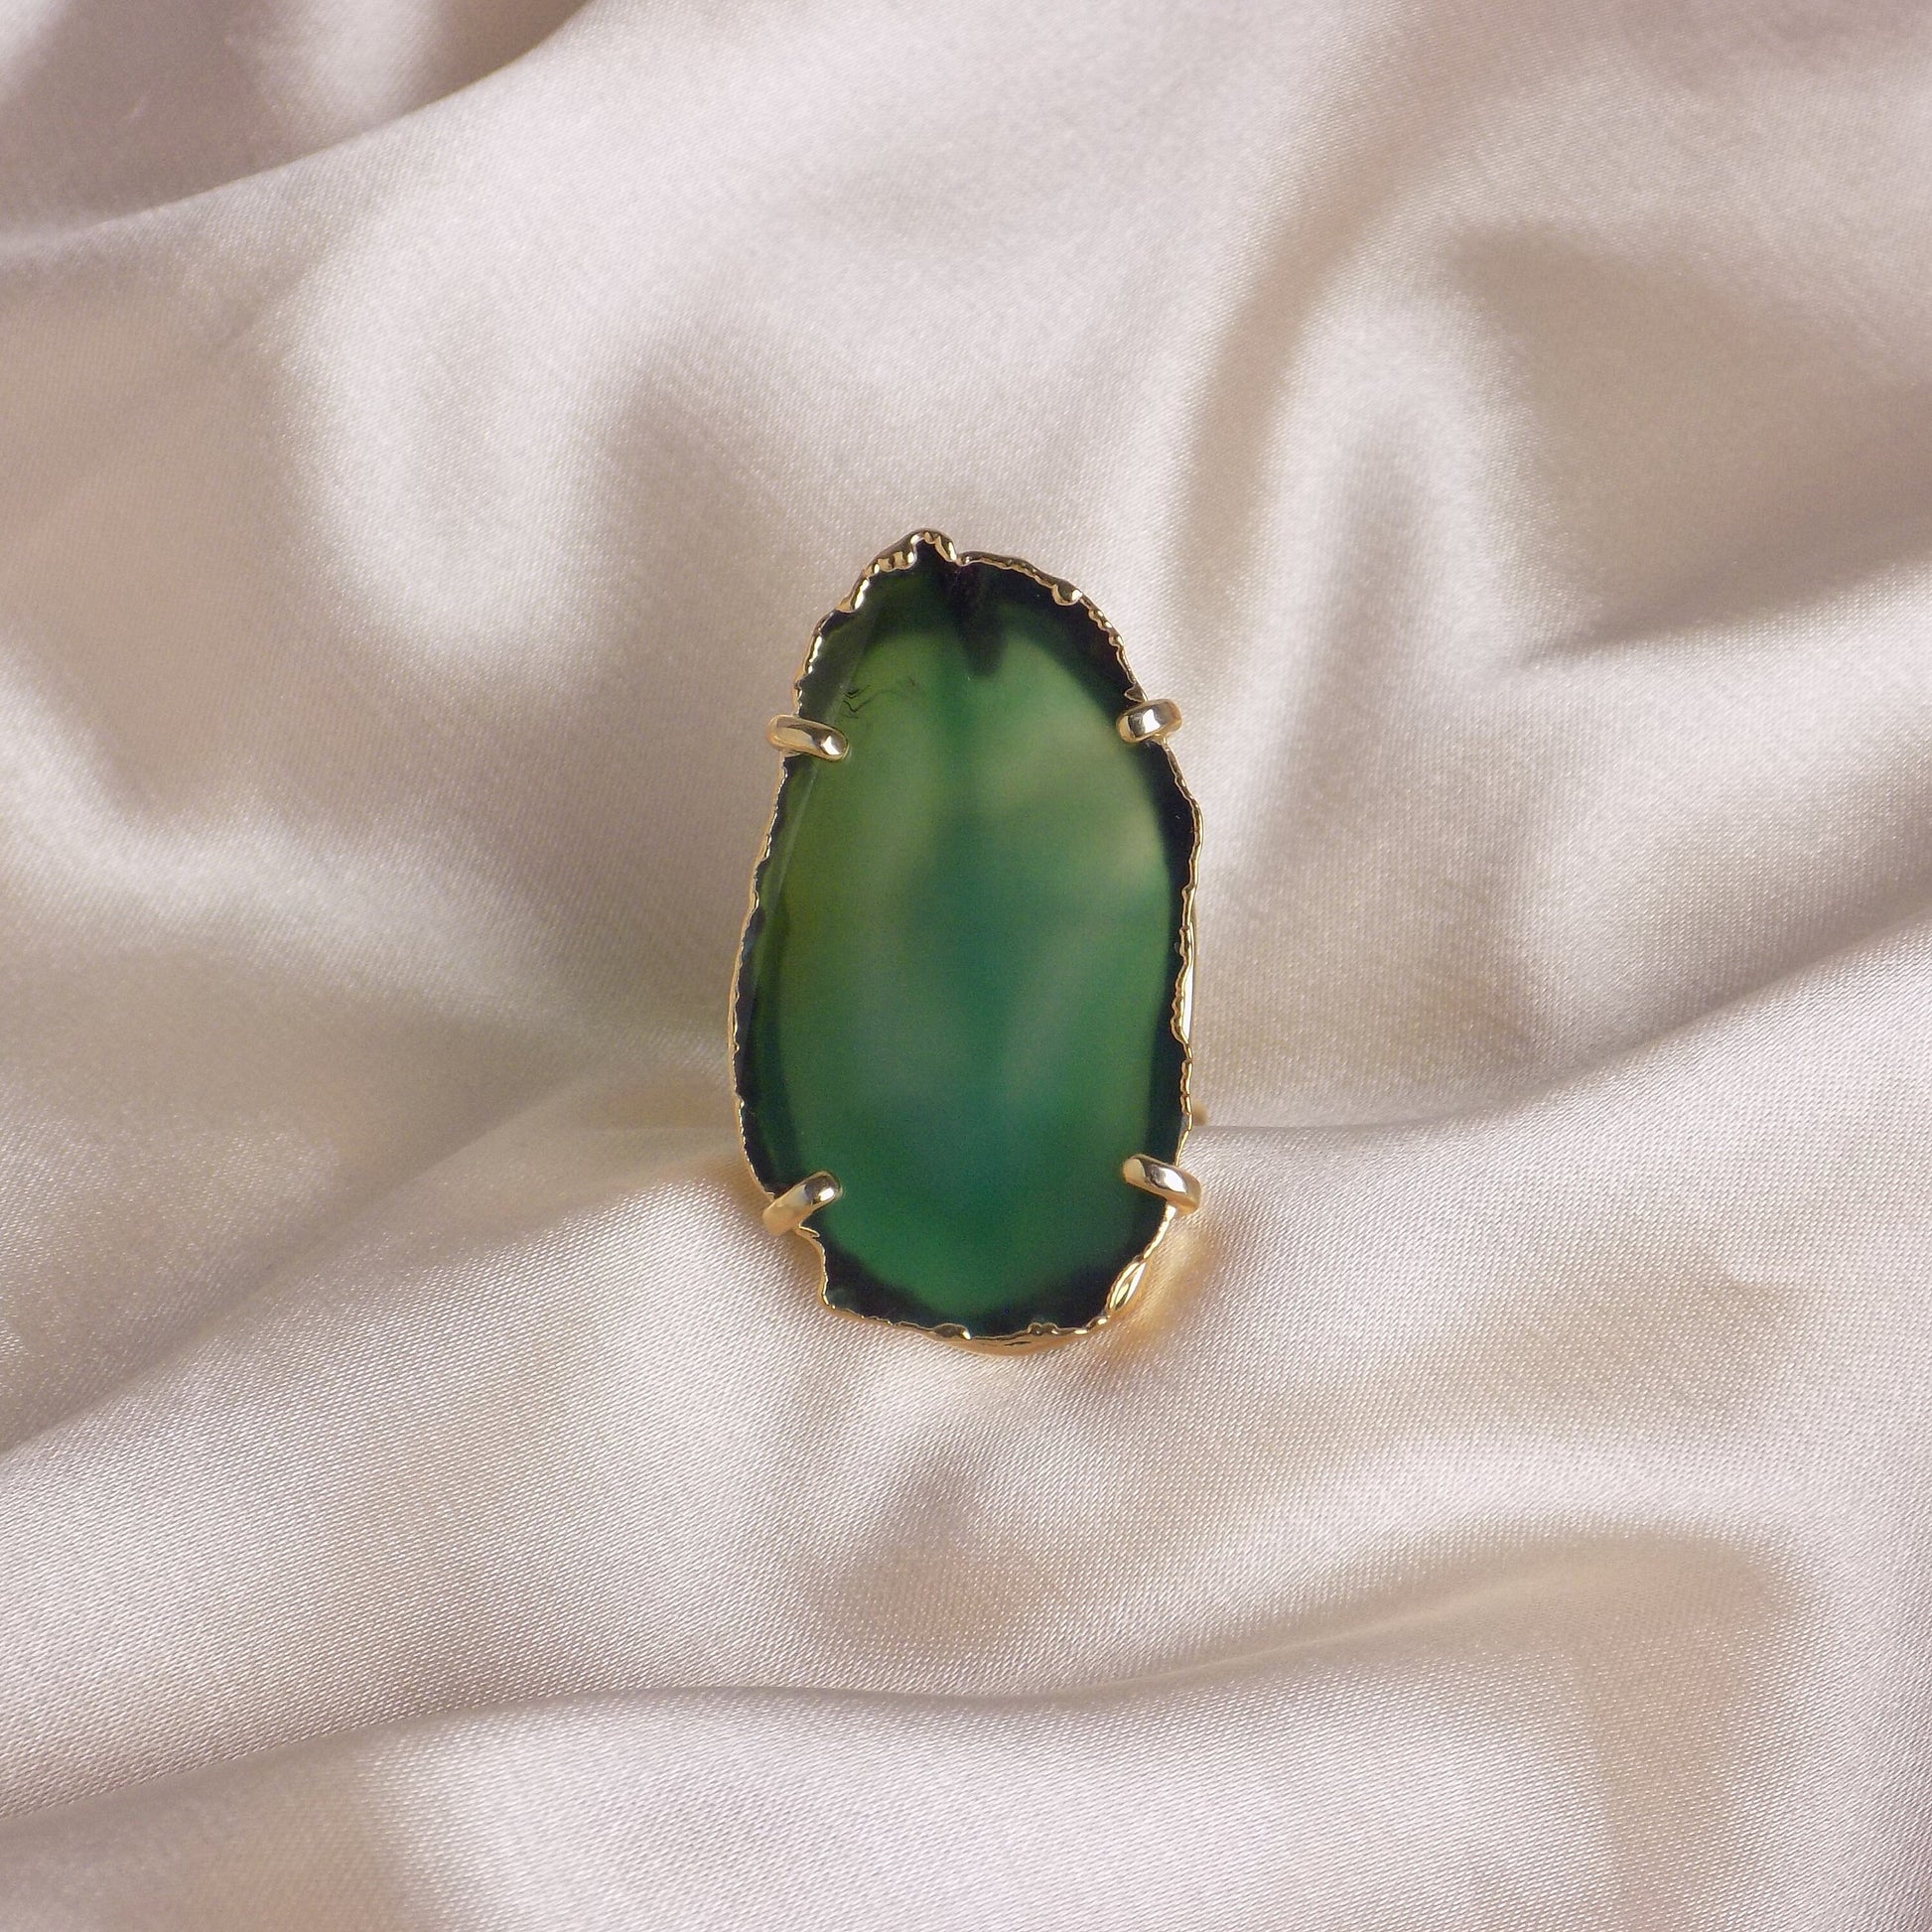 Emerald Green Agate Ring Gold - Statement Geode Ring Adjustable - Boho Large Stone - G15-224